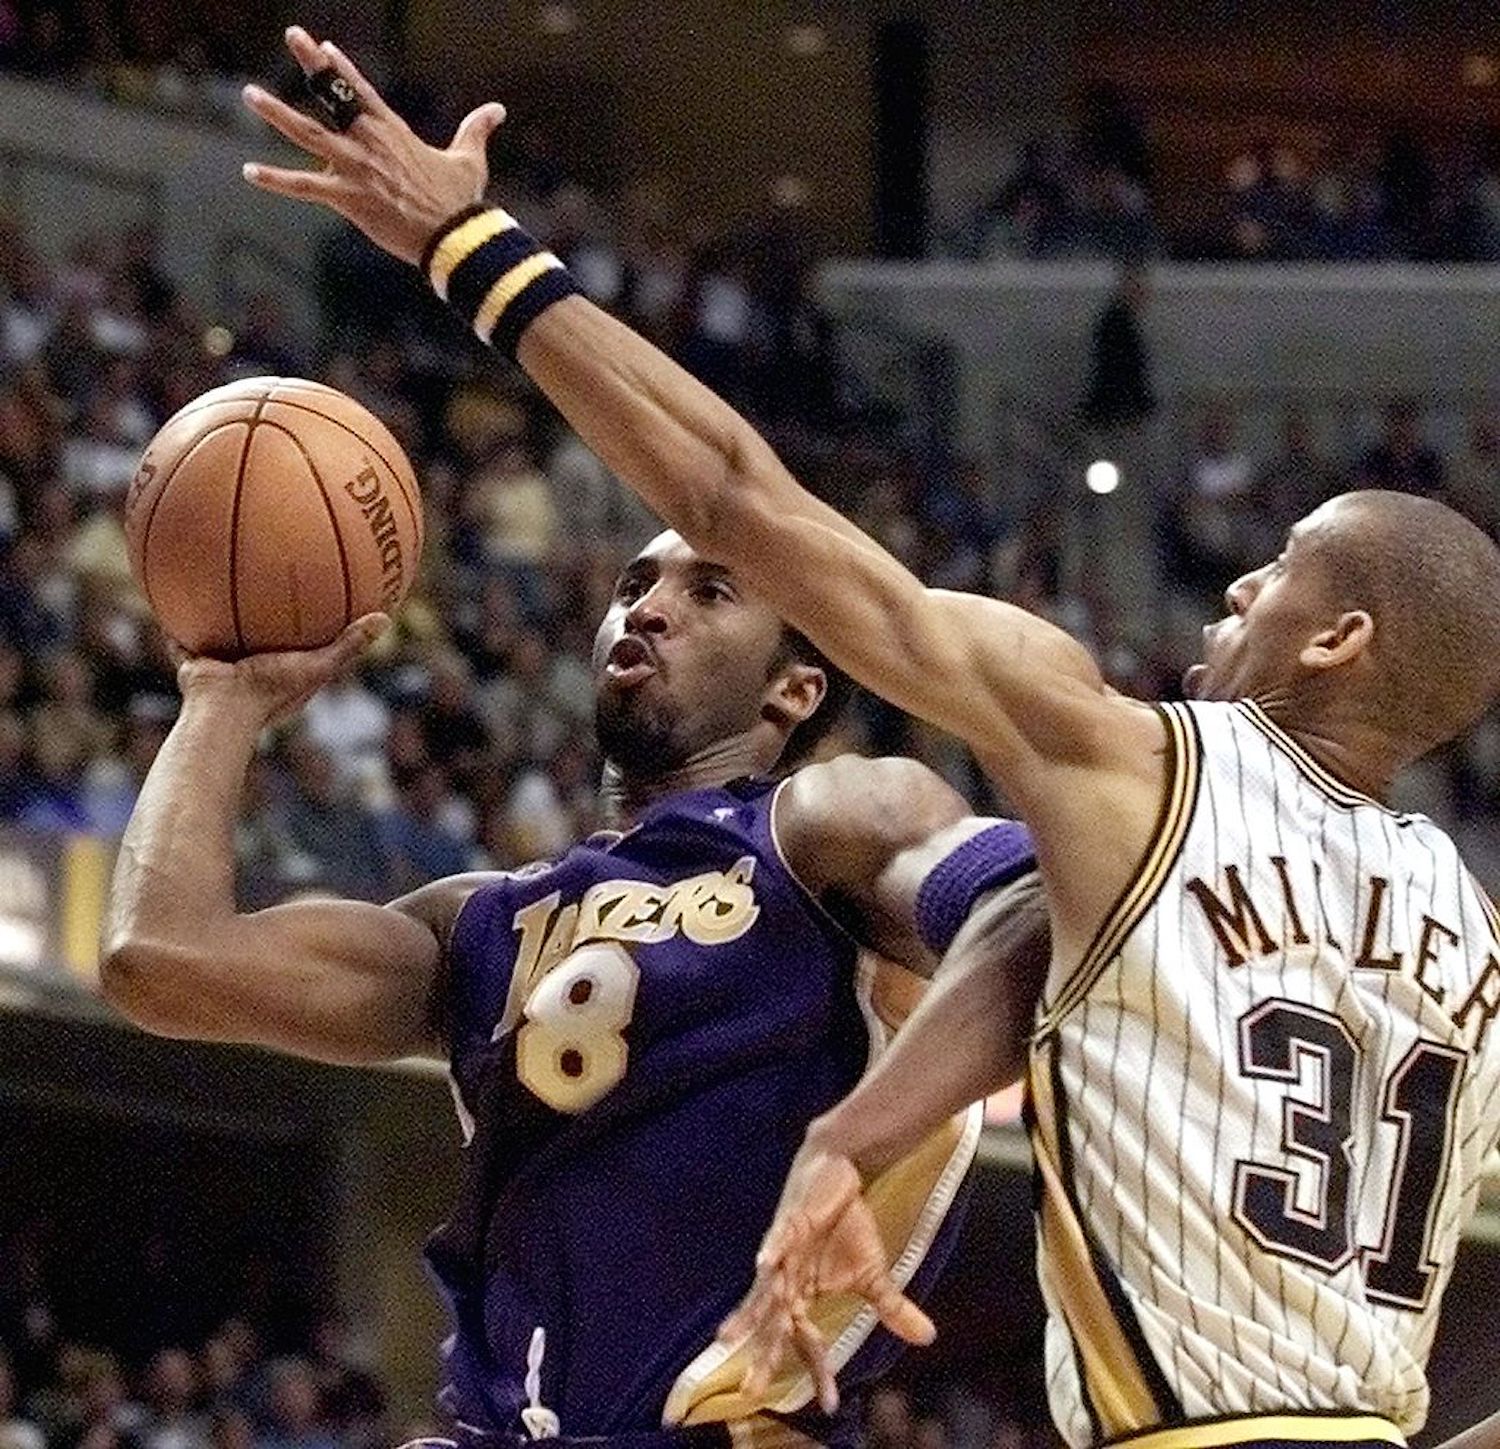 Kobe Bryant and Reggie Miller are the ultimate competitors, but one time they took it too far and threw fists on the court after the buzzer.